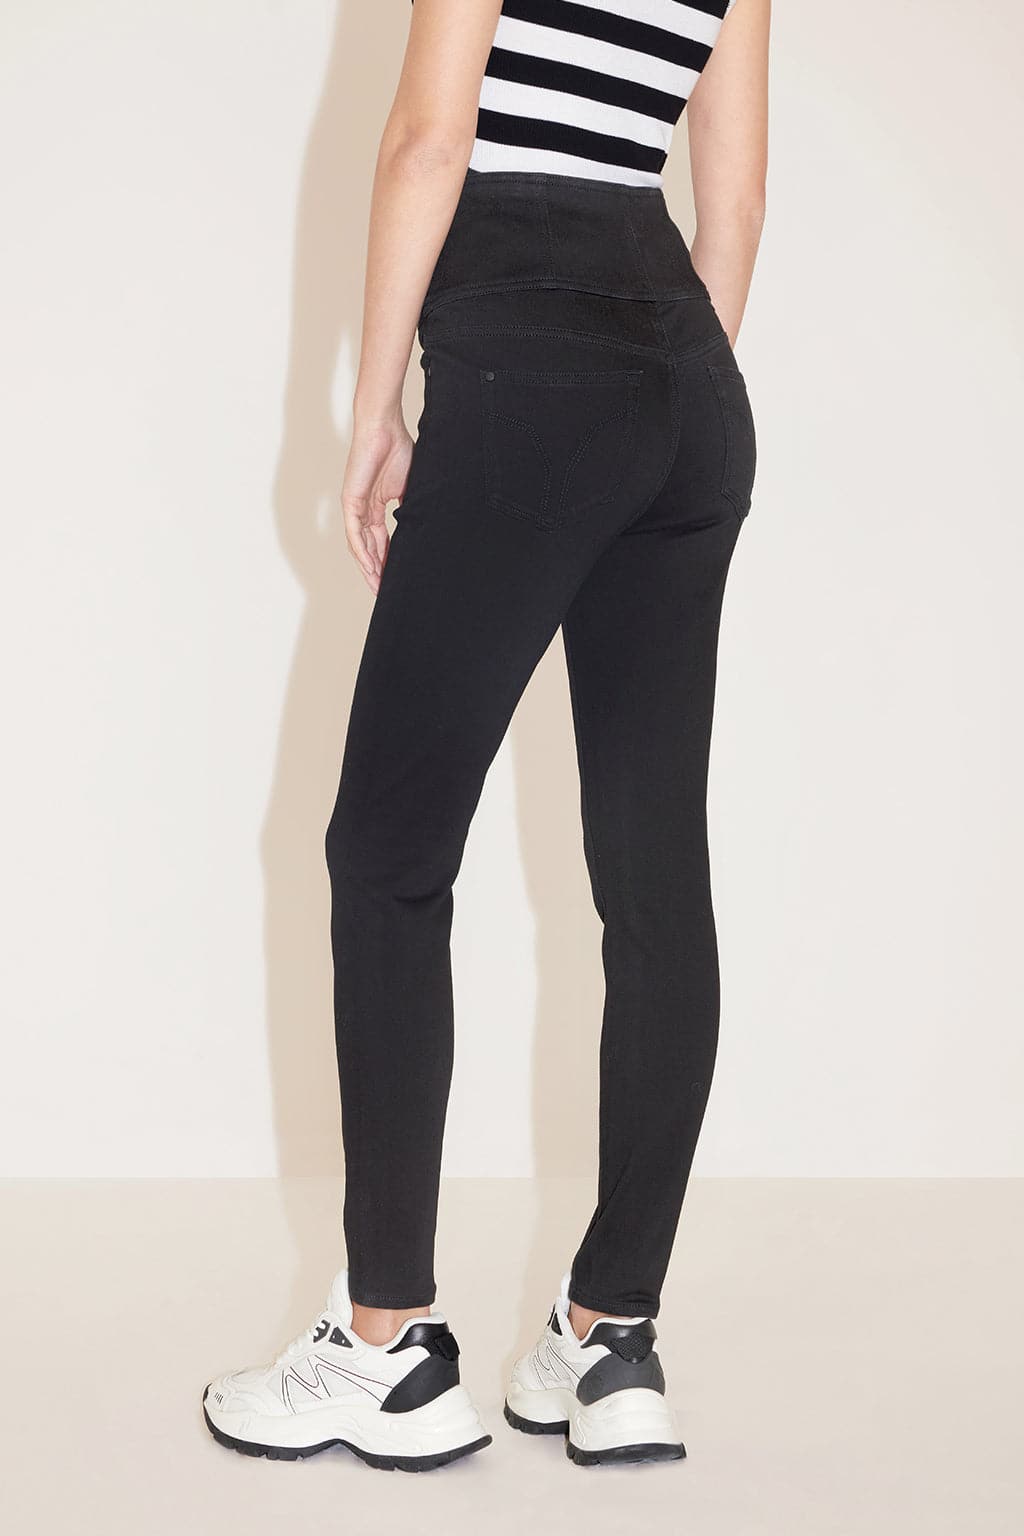 Black Super High Waist Jeans With Four Buttons – MISS SIXTY